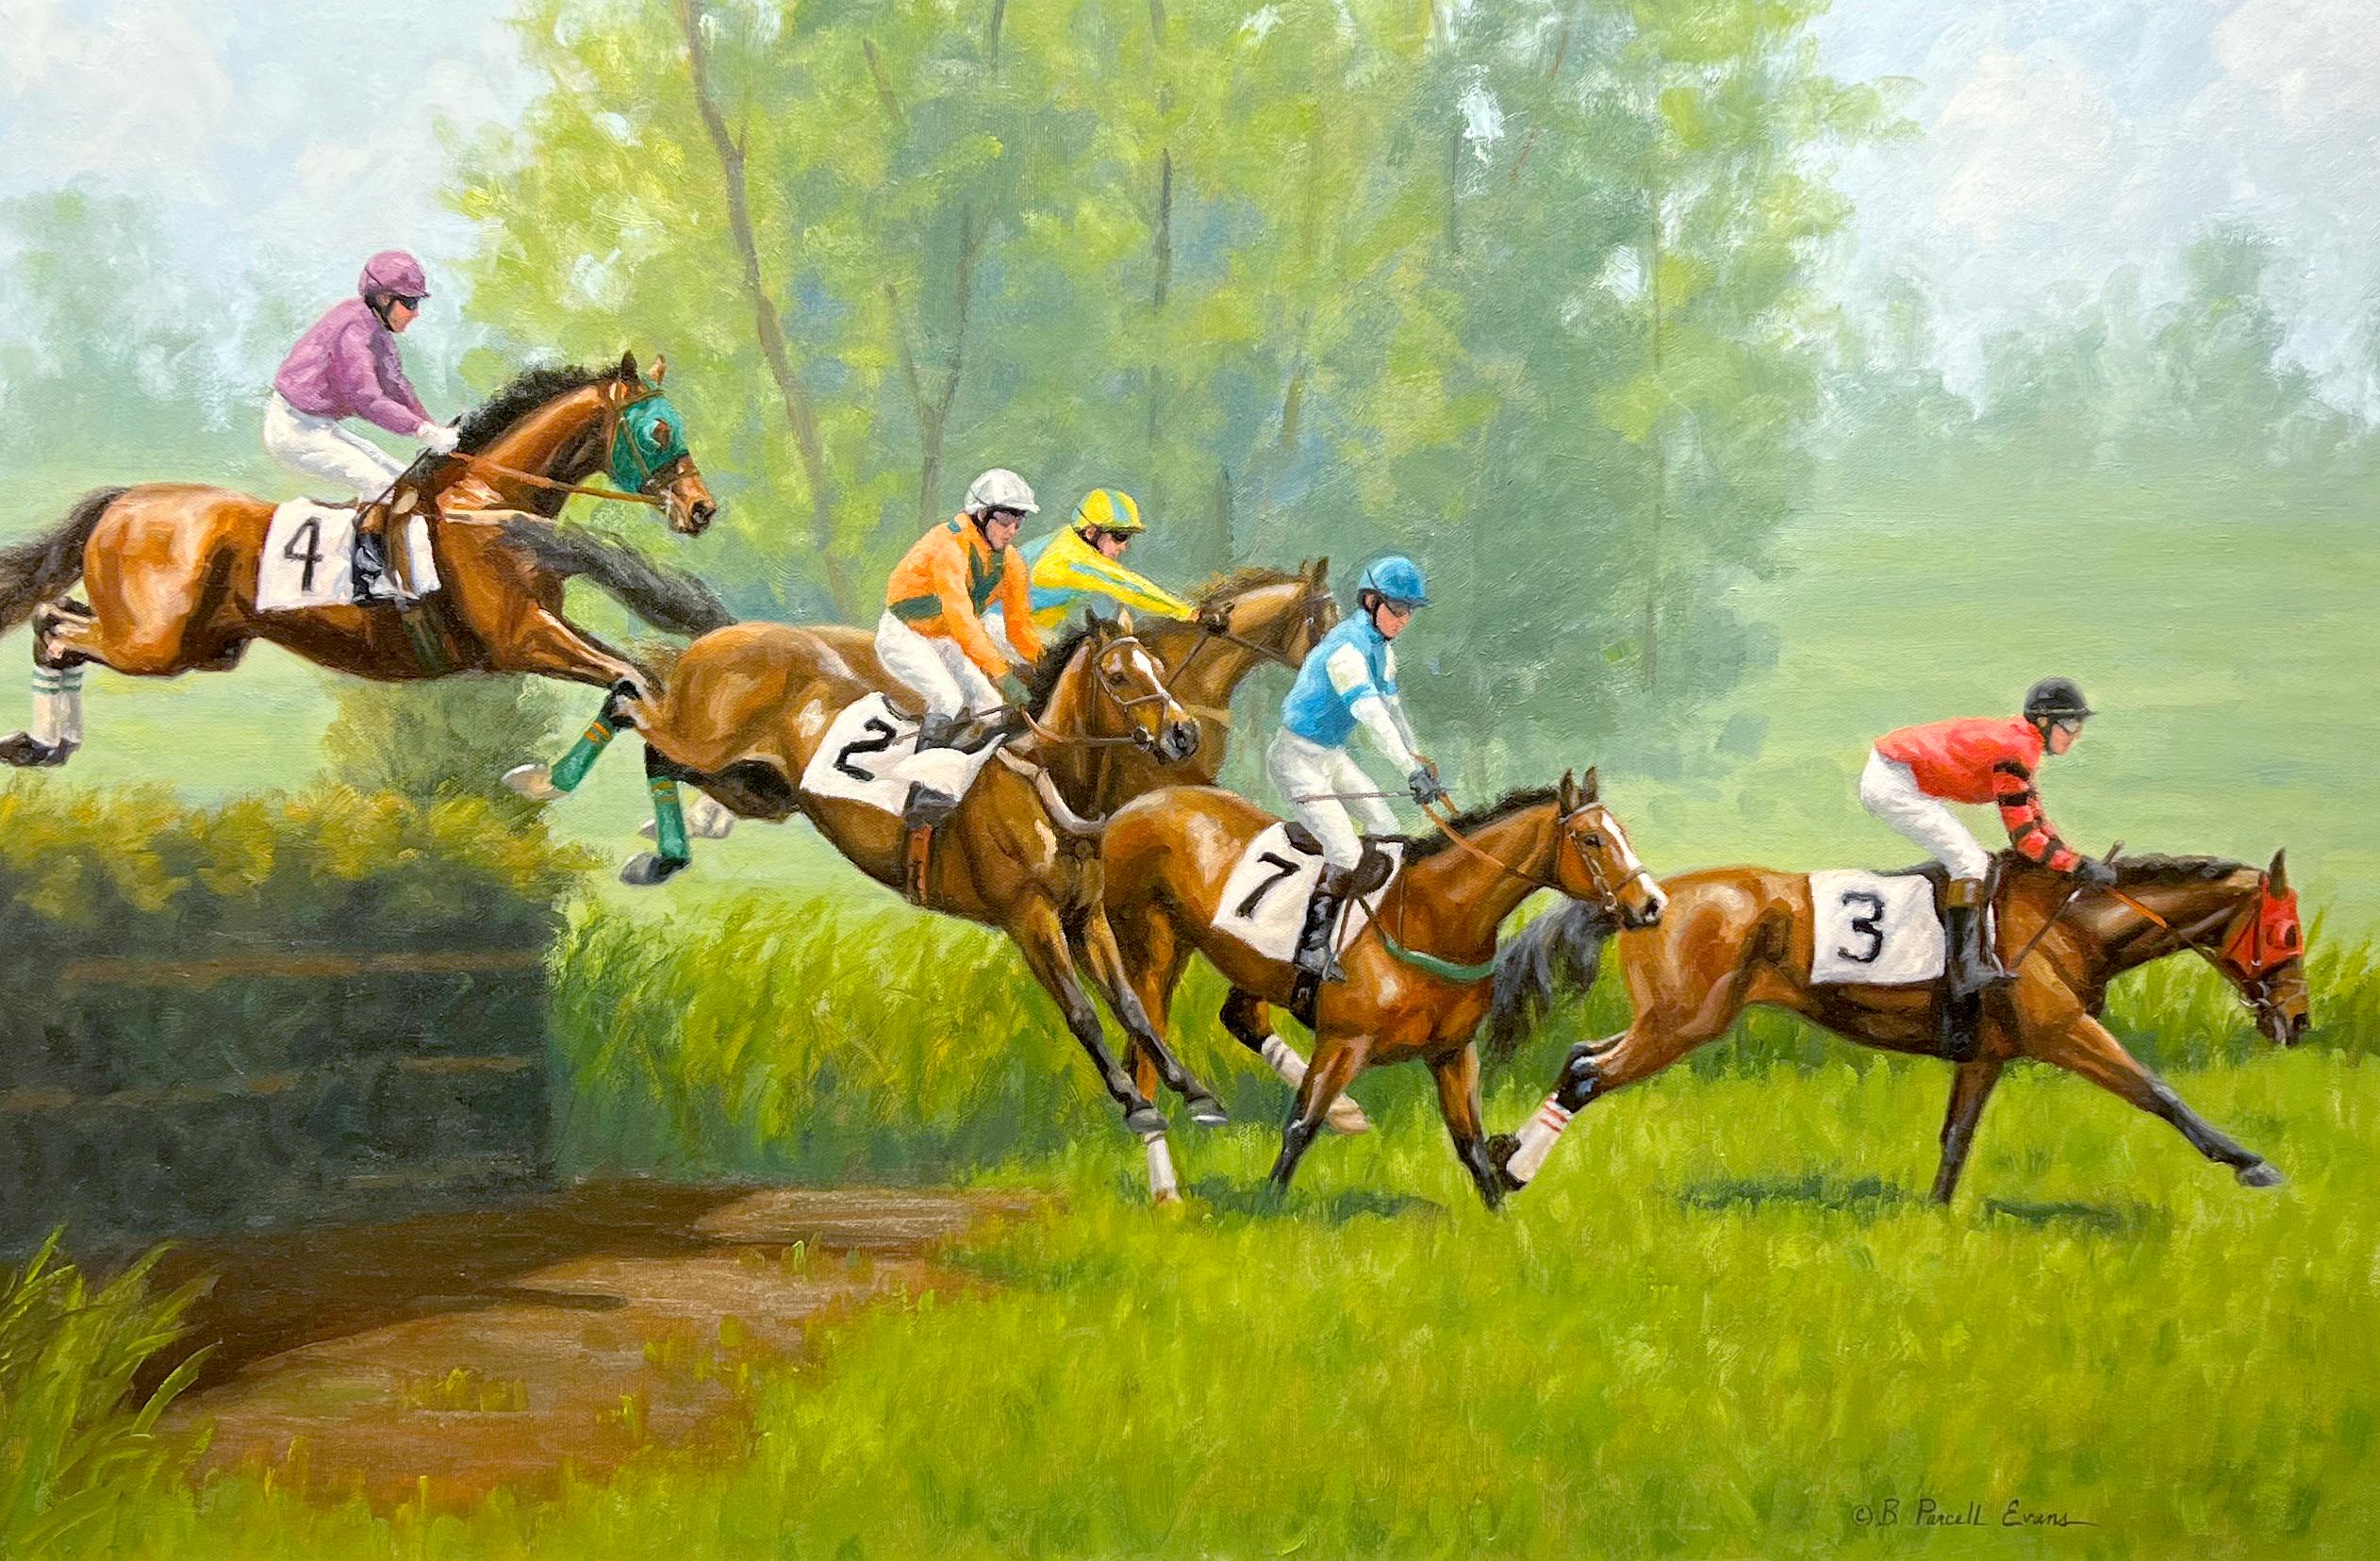 Beth Parcell  Animal Painting - Beth Parcell, "Brave Hearts", 20x30 Steeplechase Racing Oil Painting on Canvas 